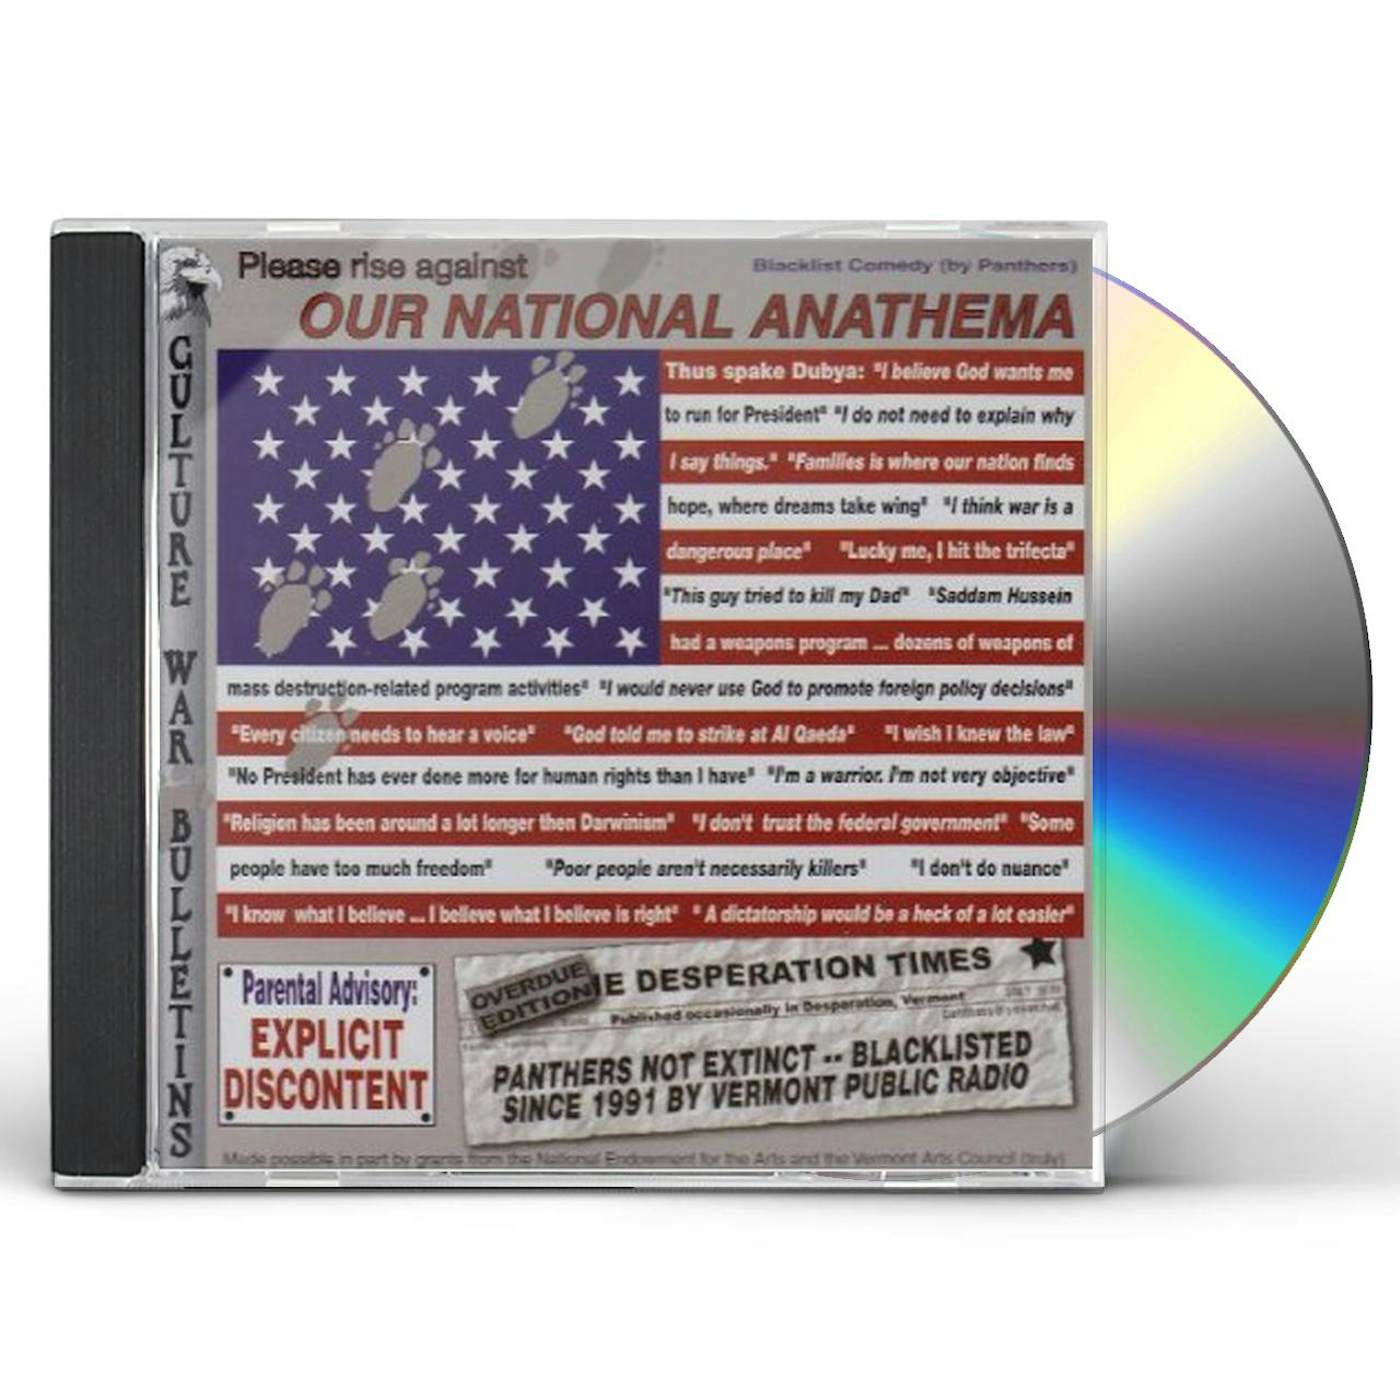 Panthers PLEASE RISE AGAINST OUR NATIONAL ANATHEMA CD